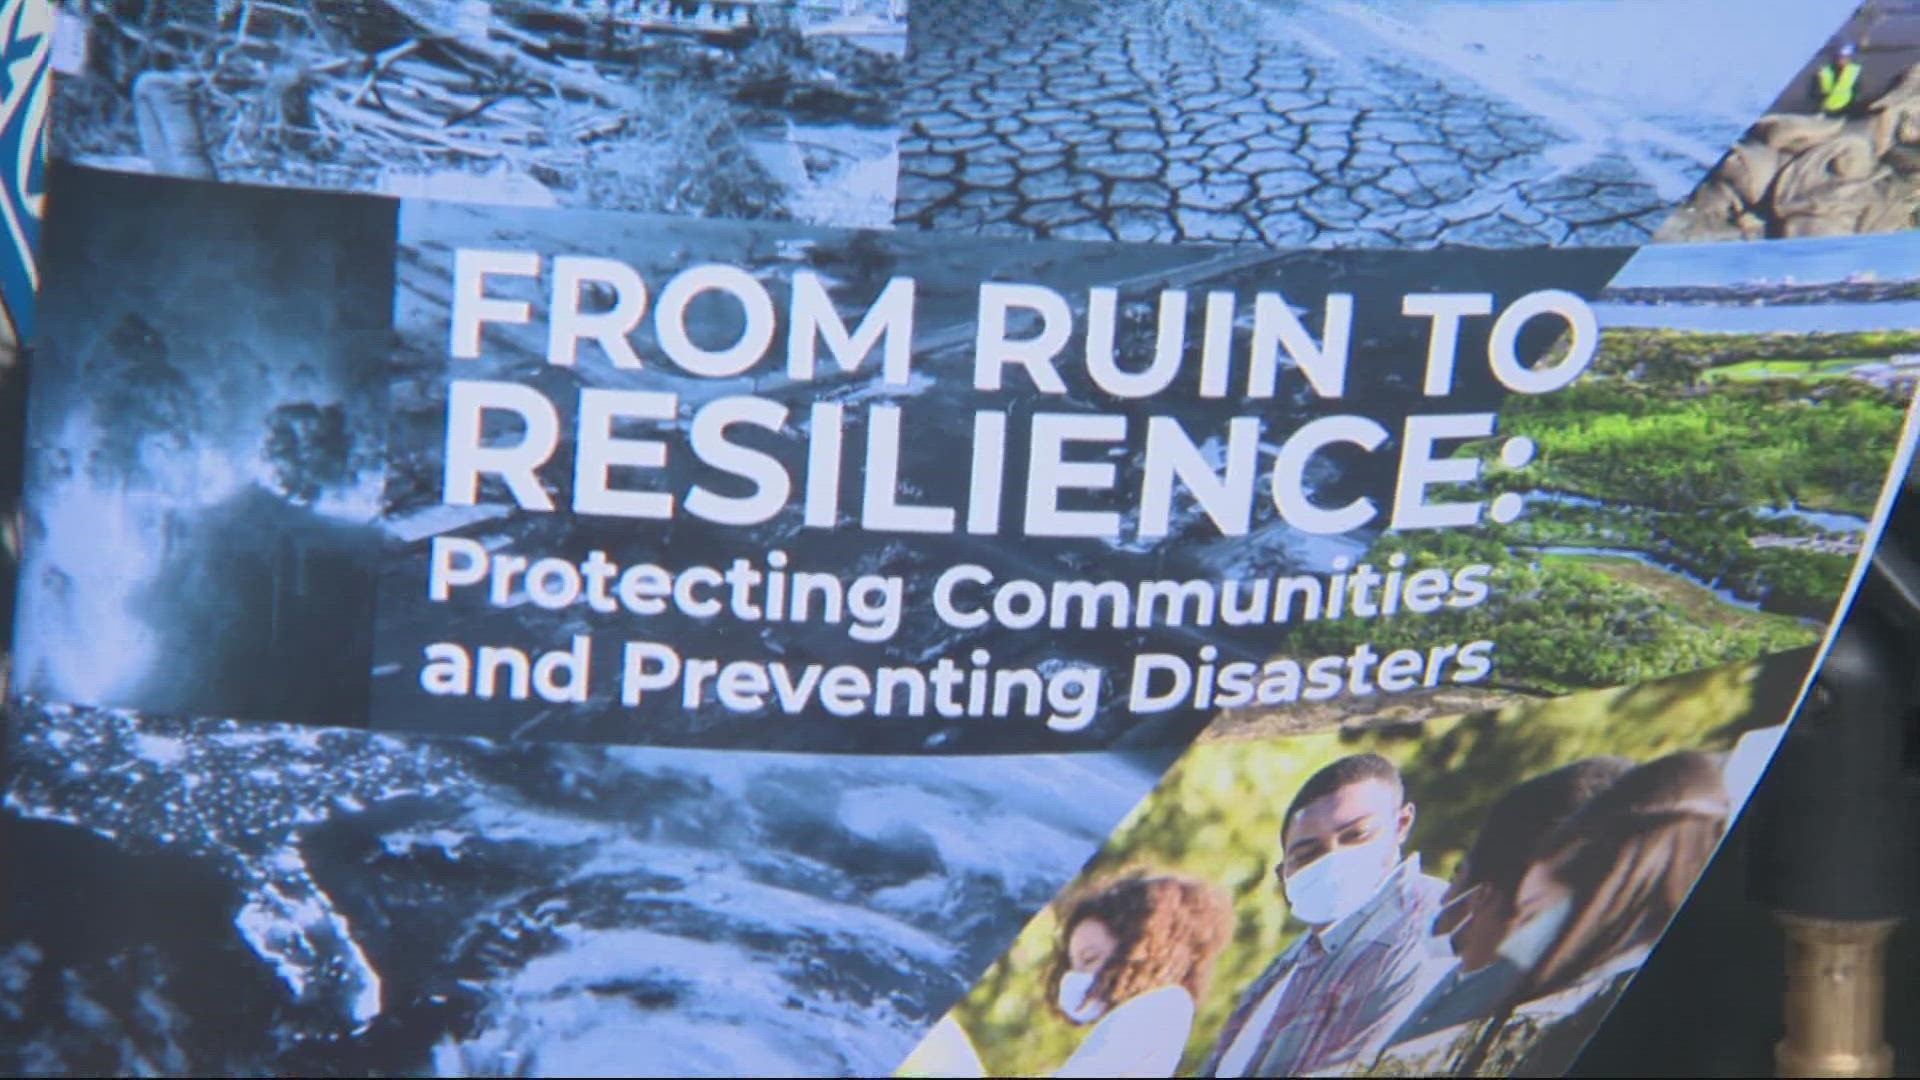 Blumenauer wants to focus on protecting people, not just responding to disasters. His new report also breaks down what the federal government is doing wrong.